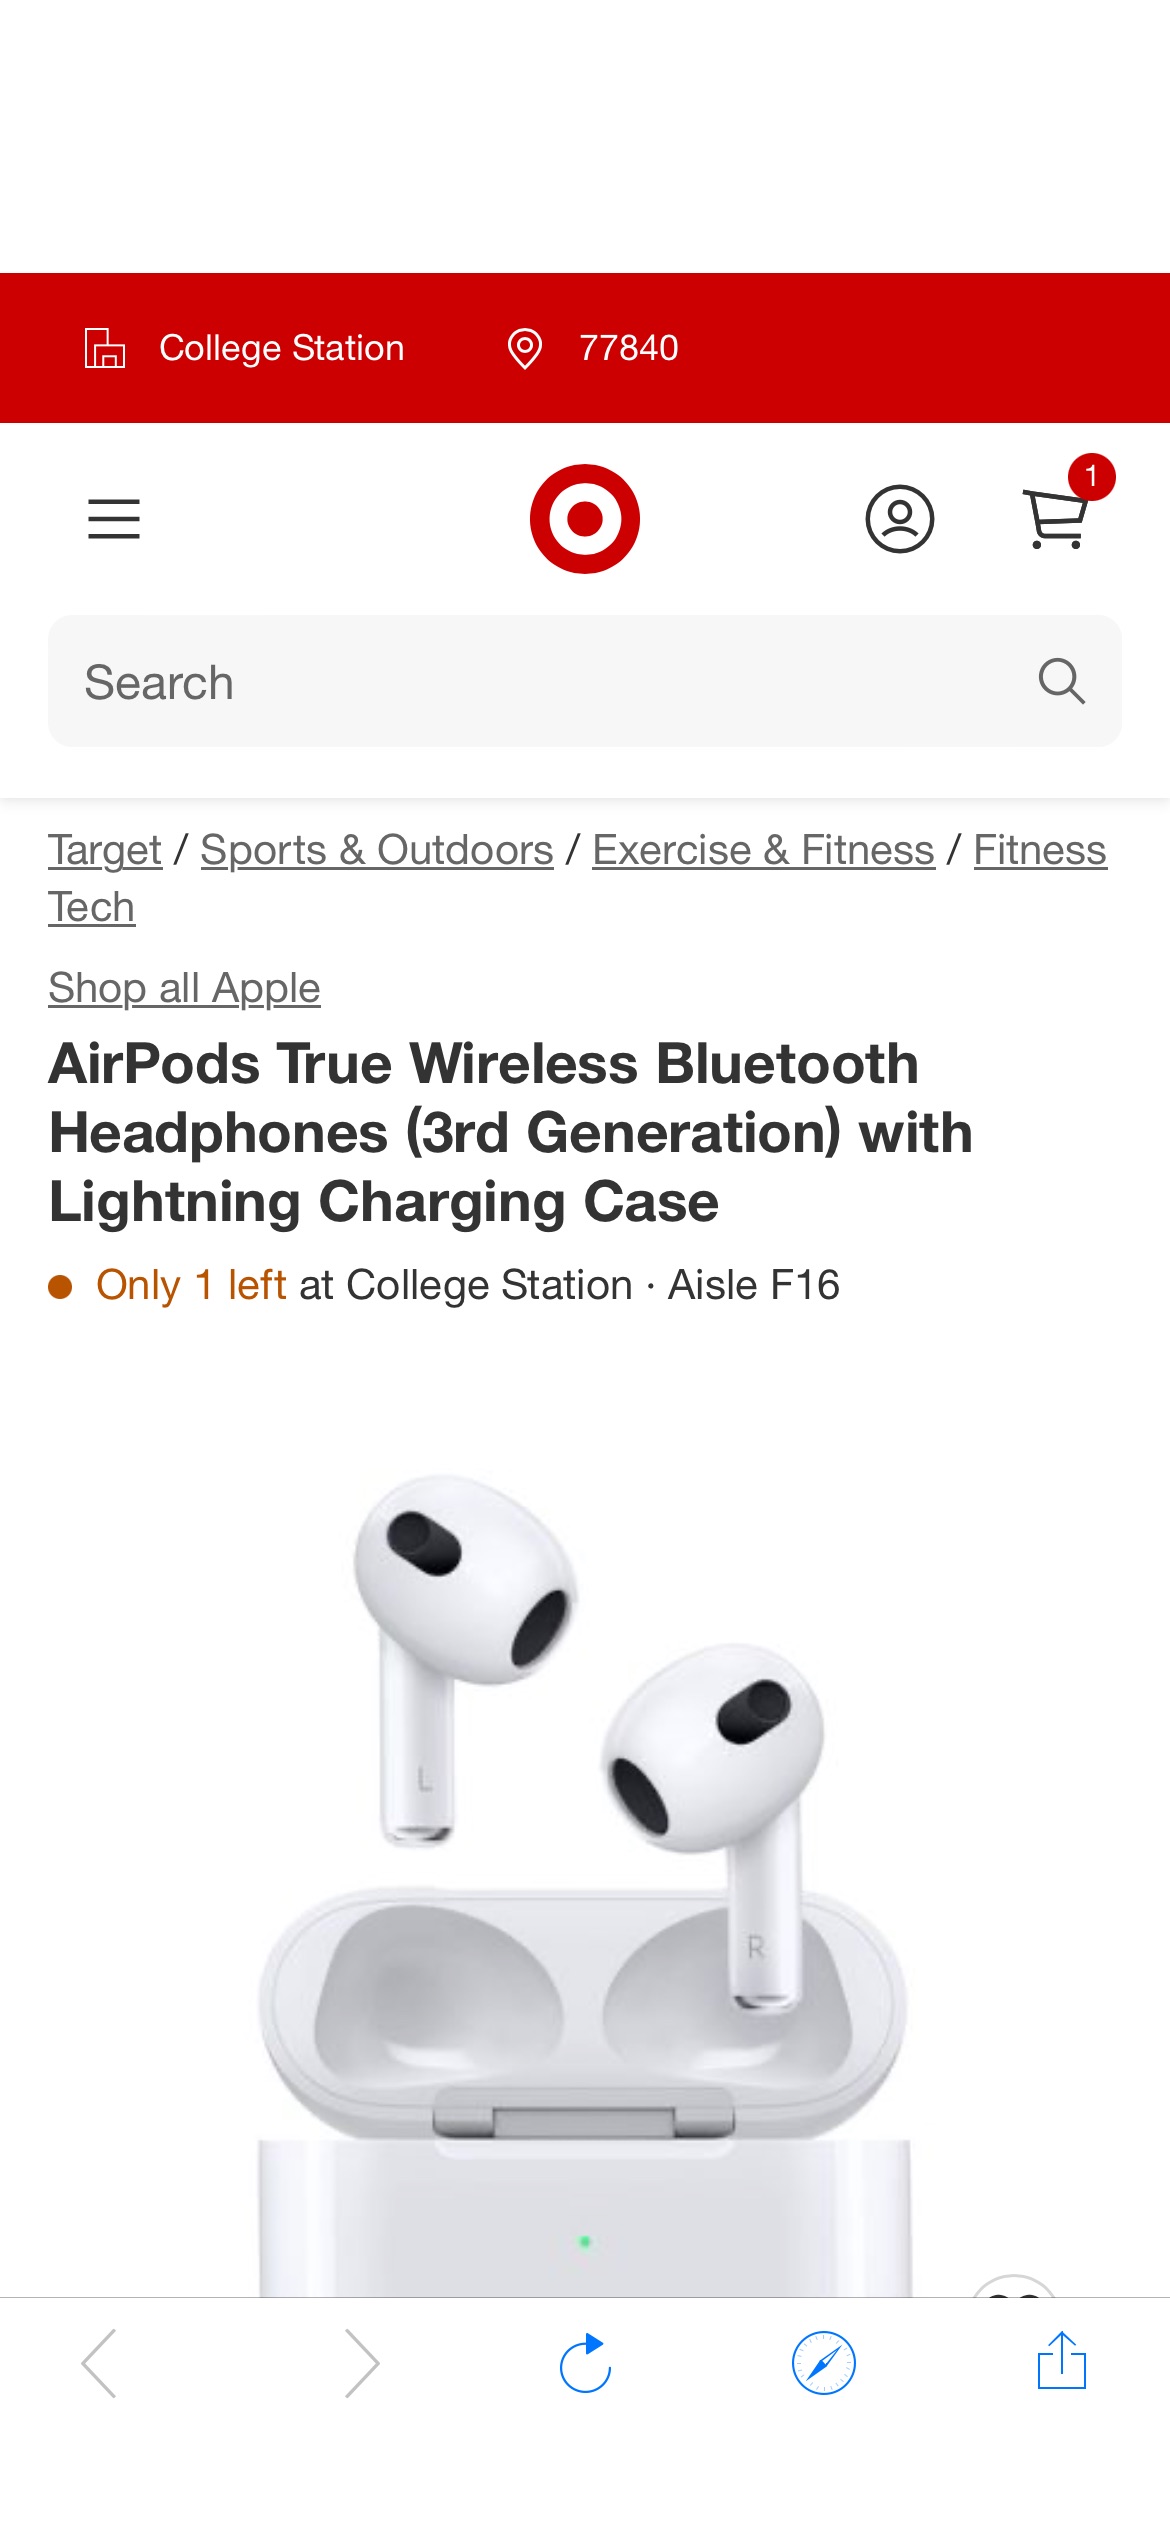 Airpods True Wireless Bluetooth Headphones (3rd Generation) With Lightning Charging Case : Target